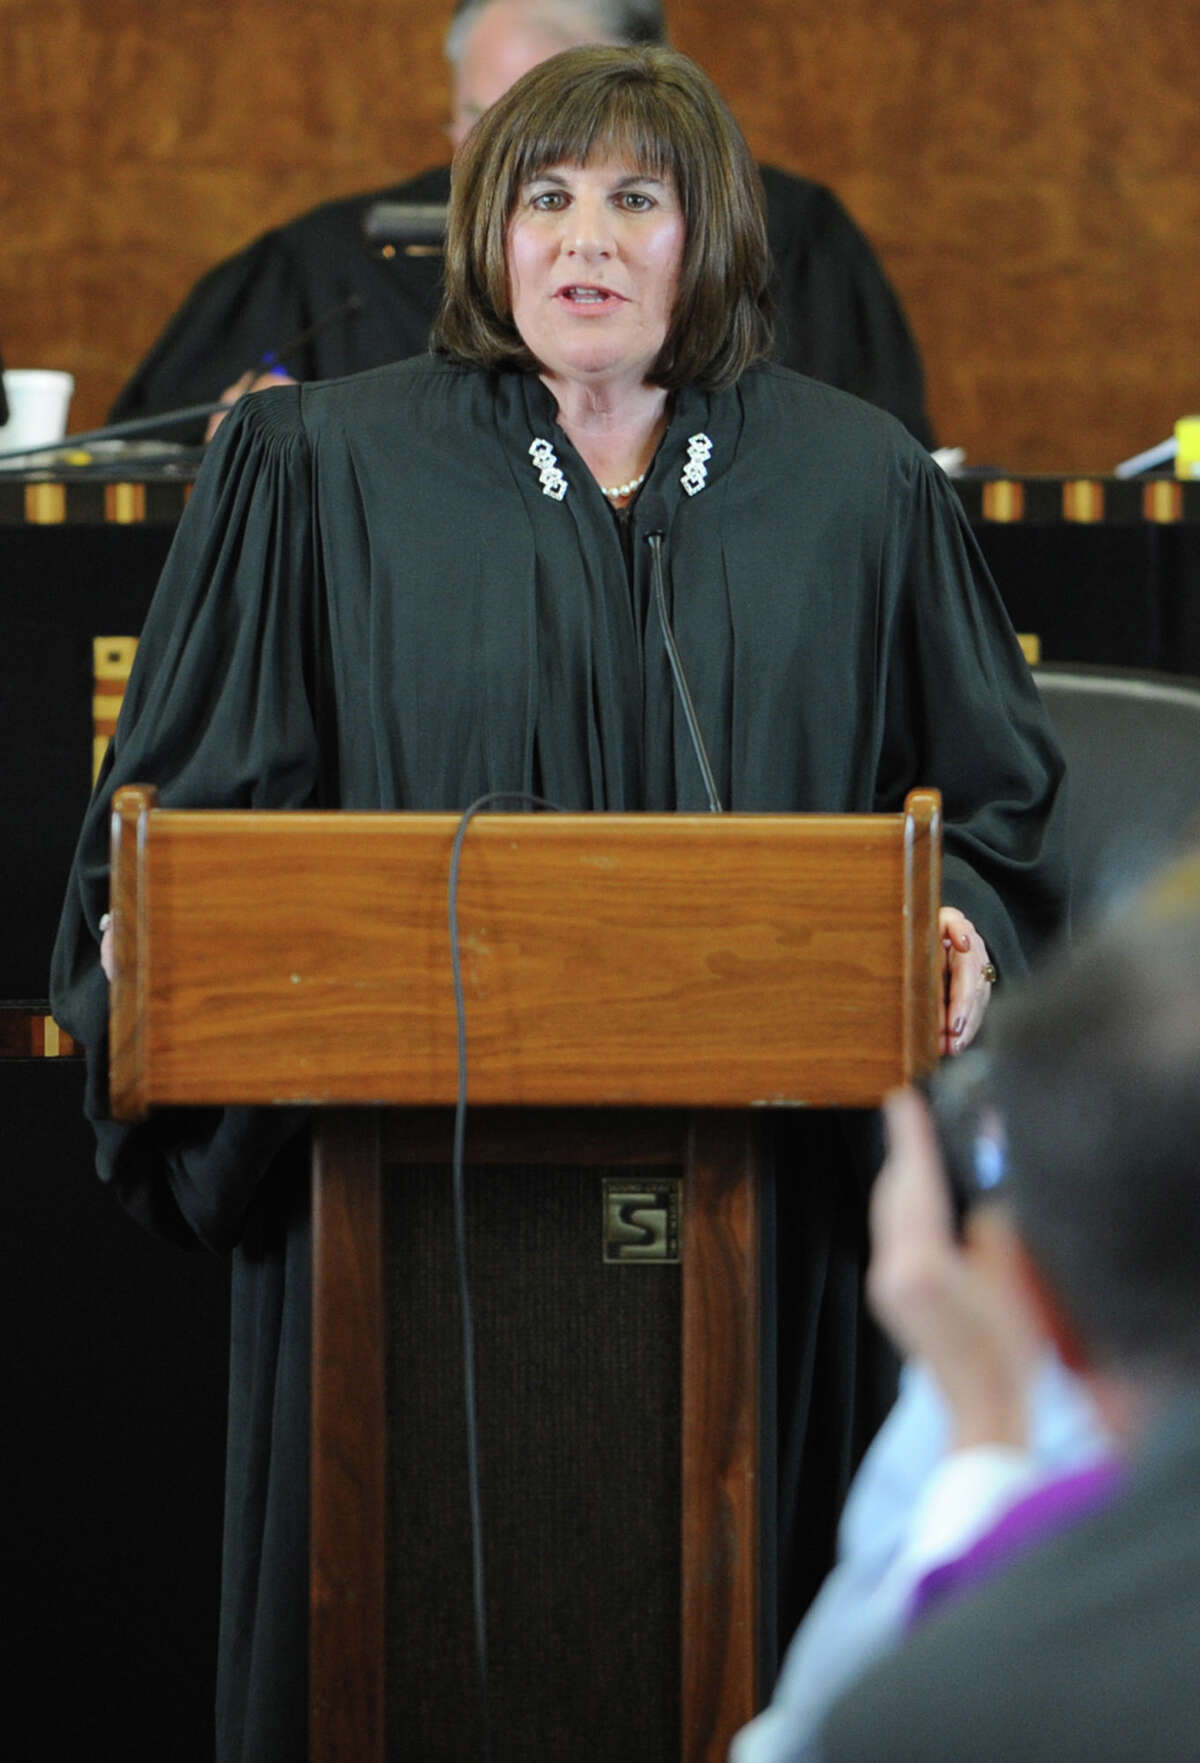 U.S. District Judge Mae D'Agostino speaks after being sworn in by Chief Judge Norman A. Mordue at the Federal Courthouse in Albany, N.Y. on Monday, Sept. 19, 2011. (Lori Van Buren / Times Union)